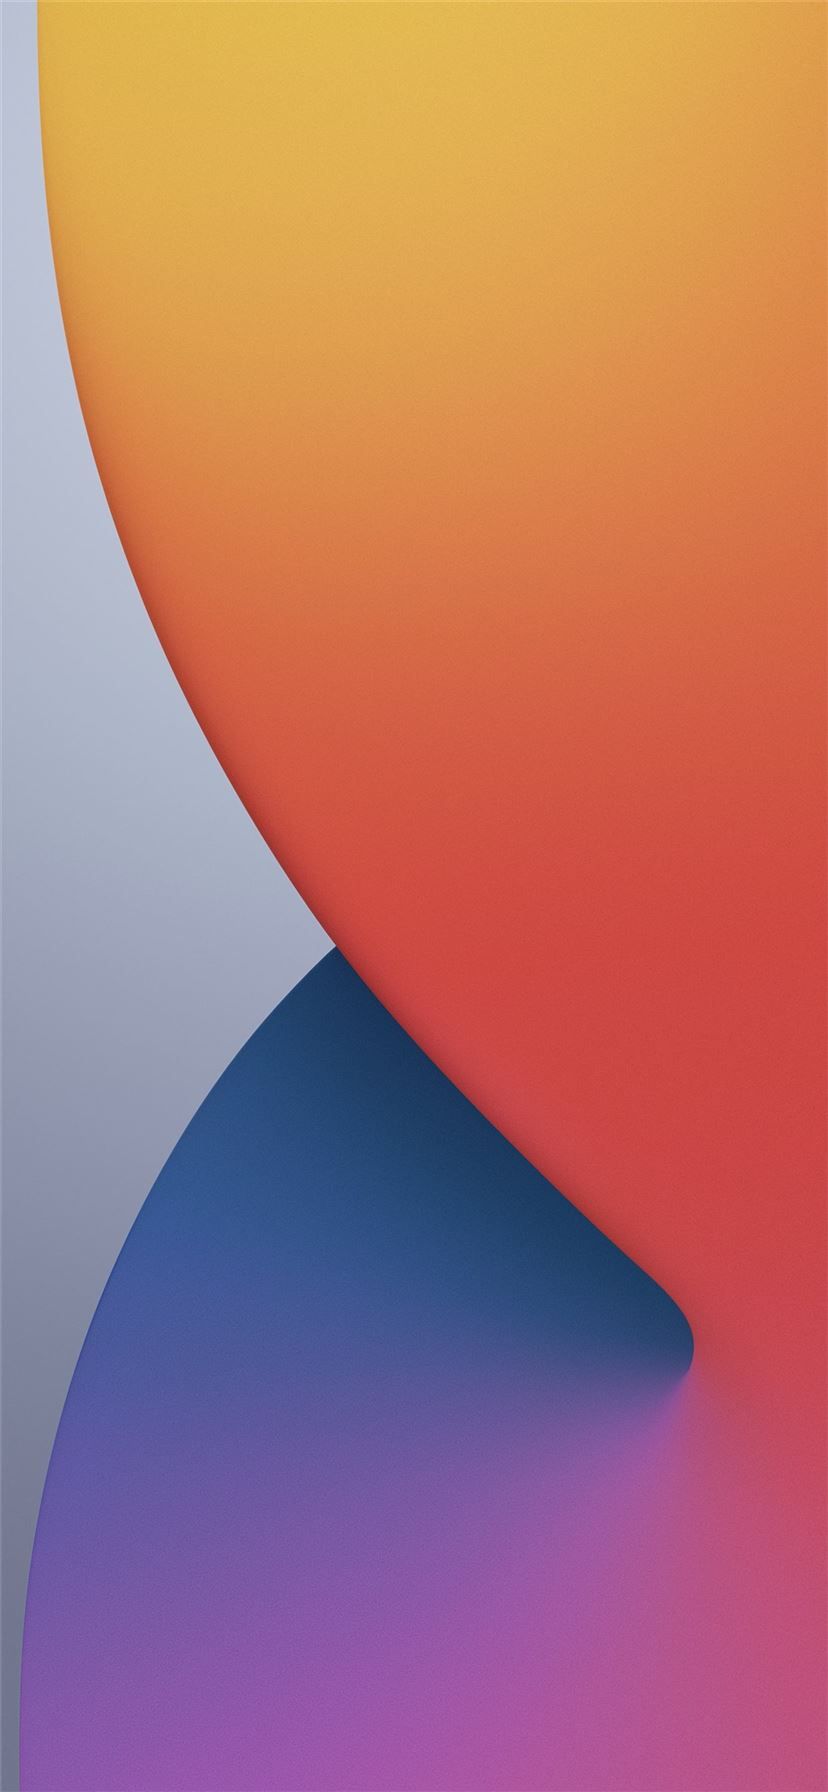 A colorful phone screen with an apple logo - Warm